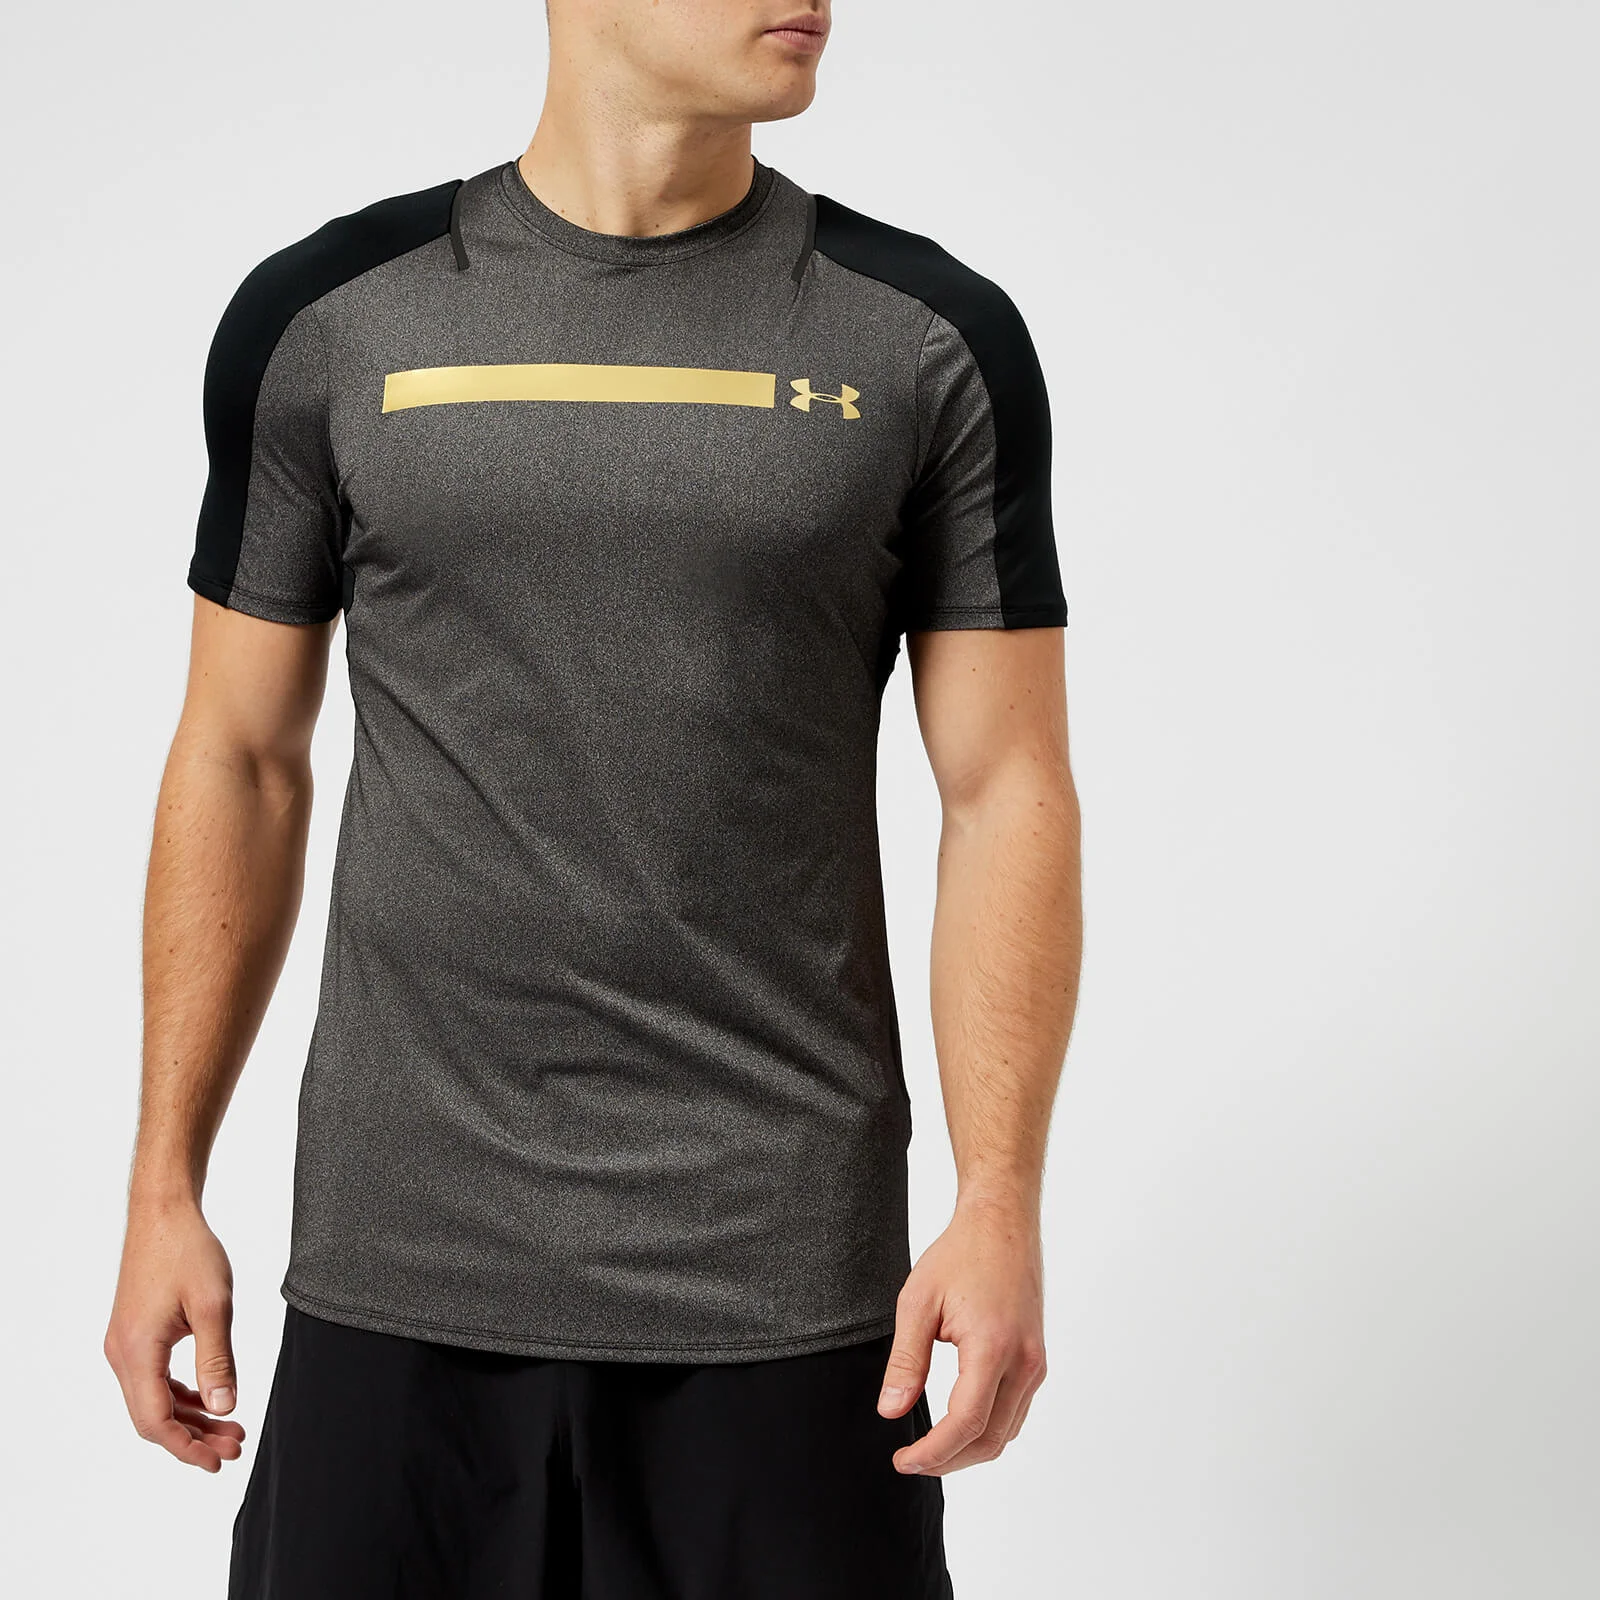 Under Armour Men's Perpetual Fitted Short Sleeve T-Shirt - Black/Metallic Gold Image 1